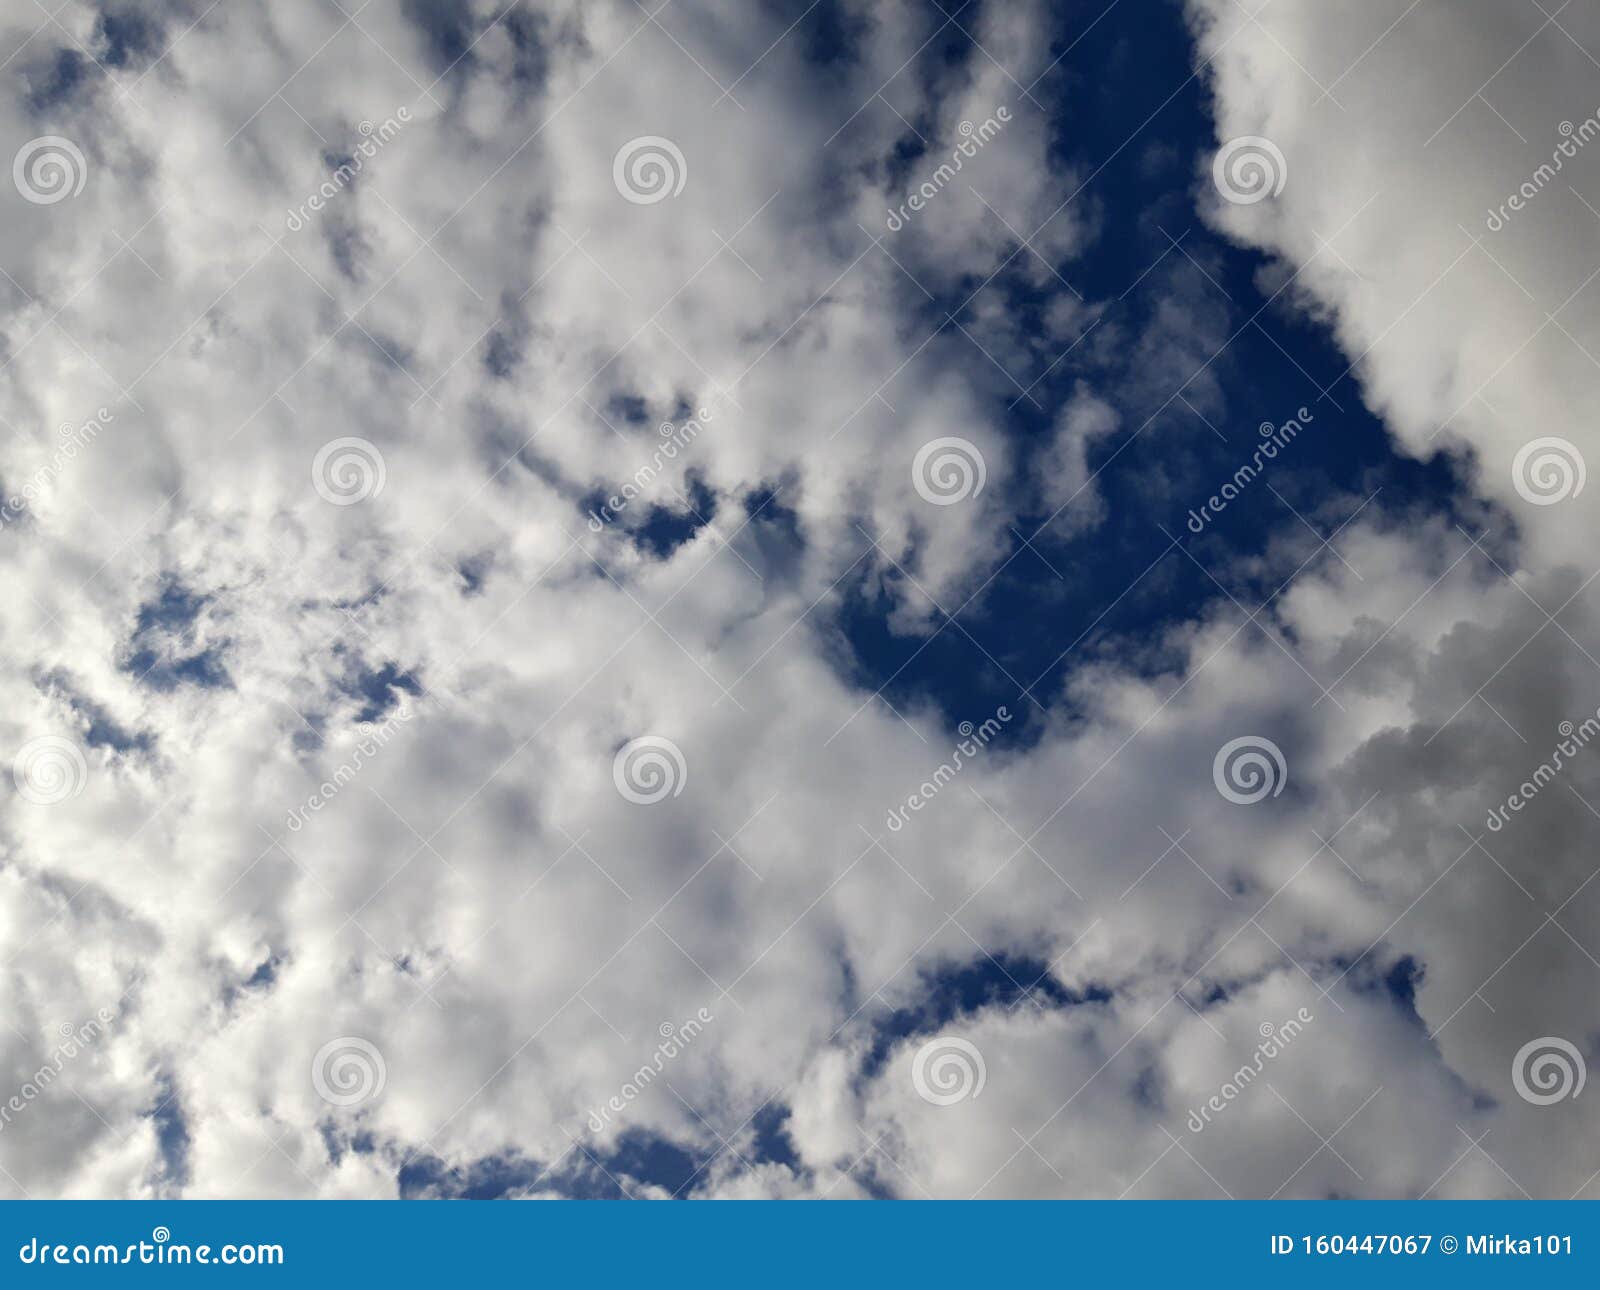 Dark Blue Sky With Big Clouds Immensity Space Perfect As A Mobile Wallpaper Stock Image Image Of Dark Blue 160447067